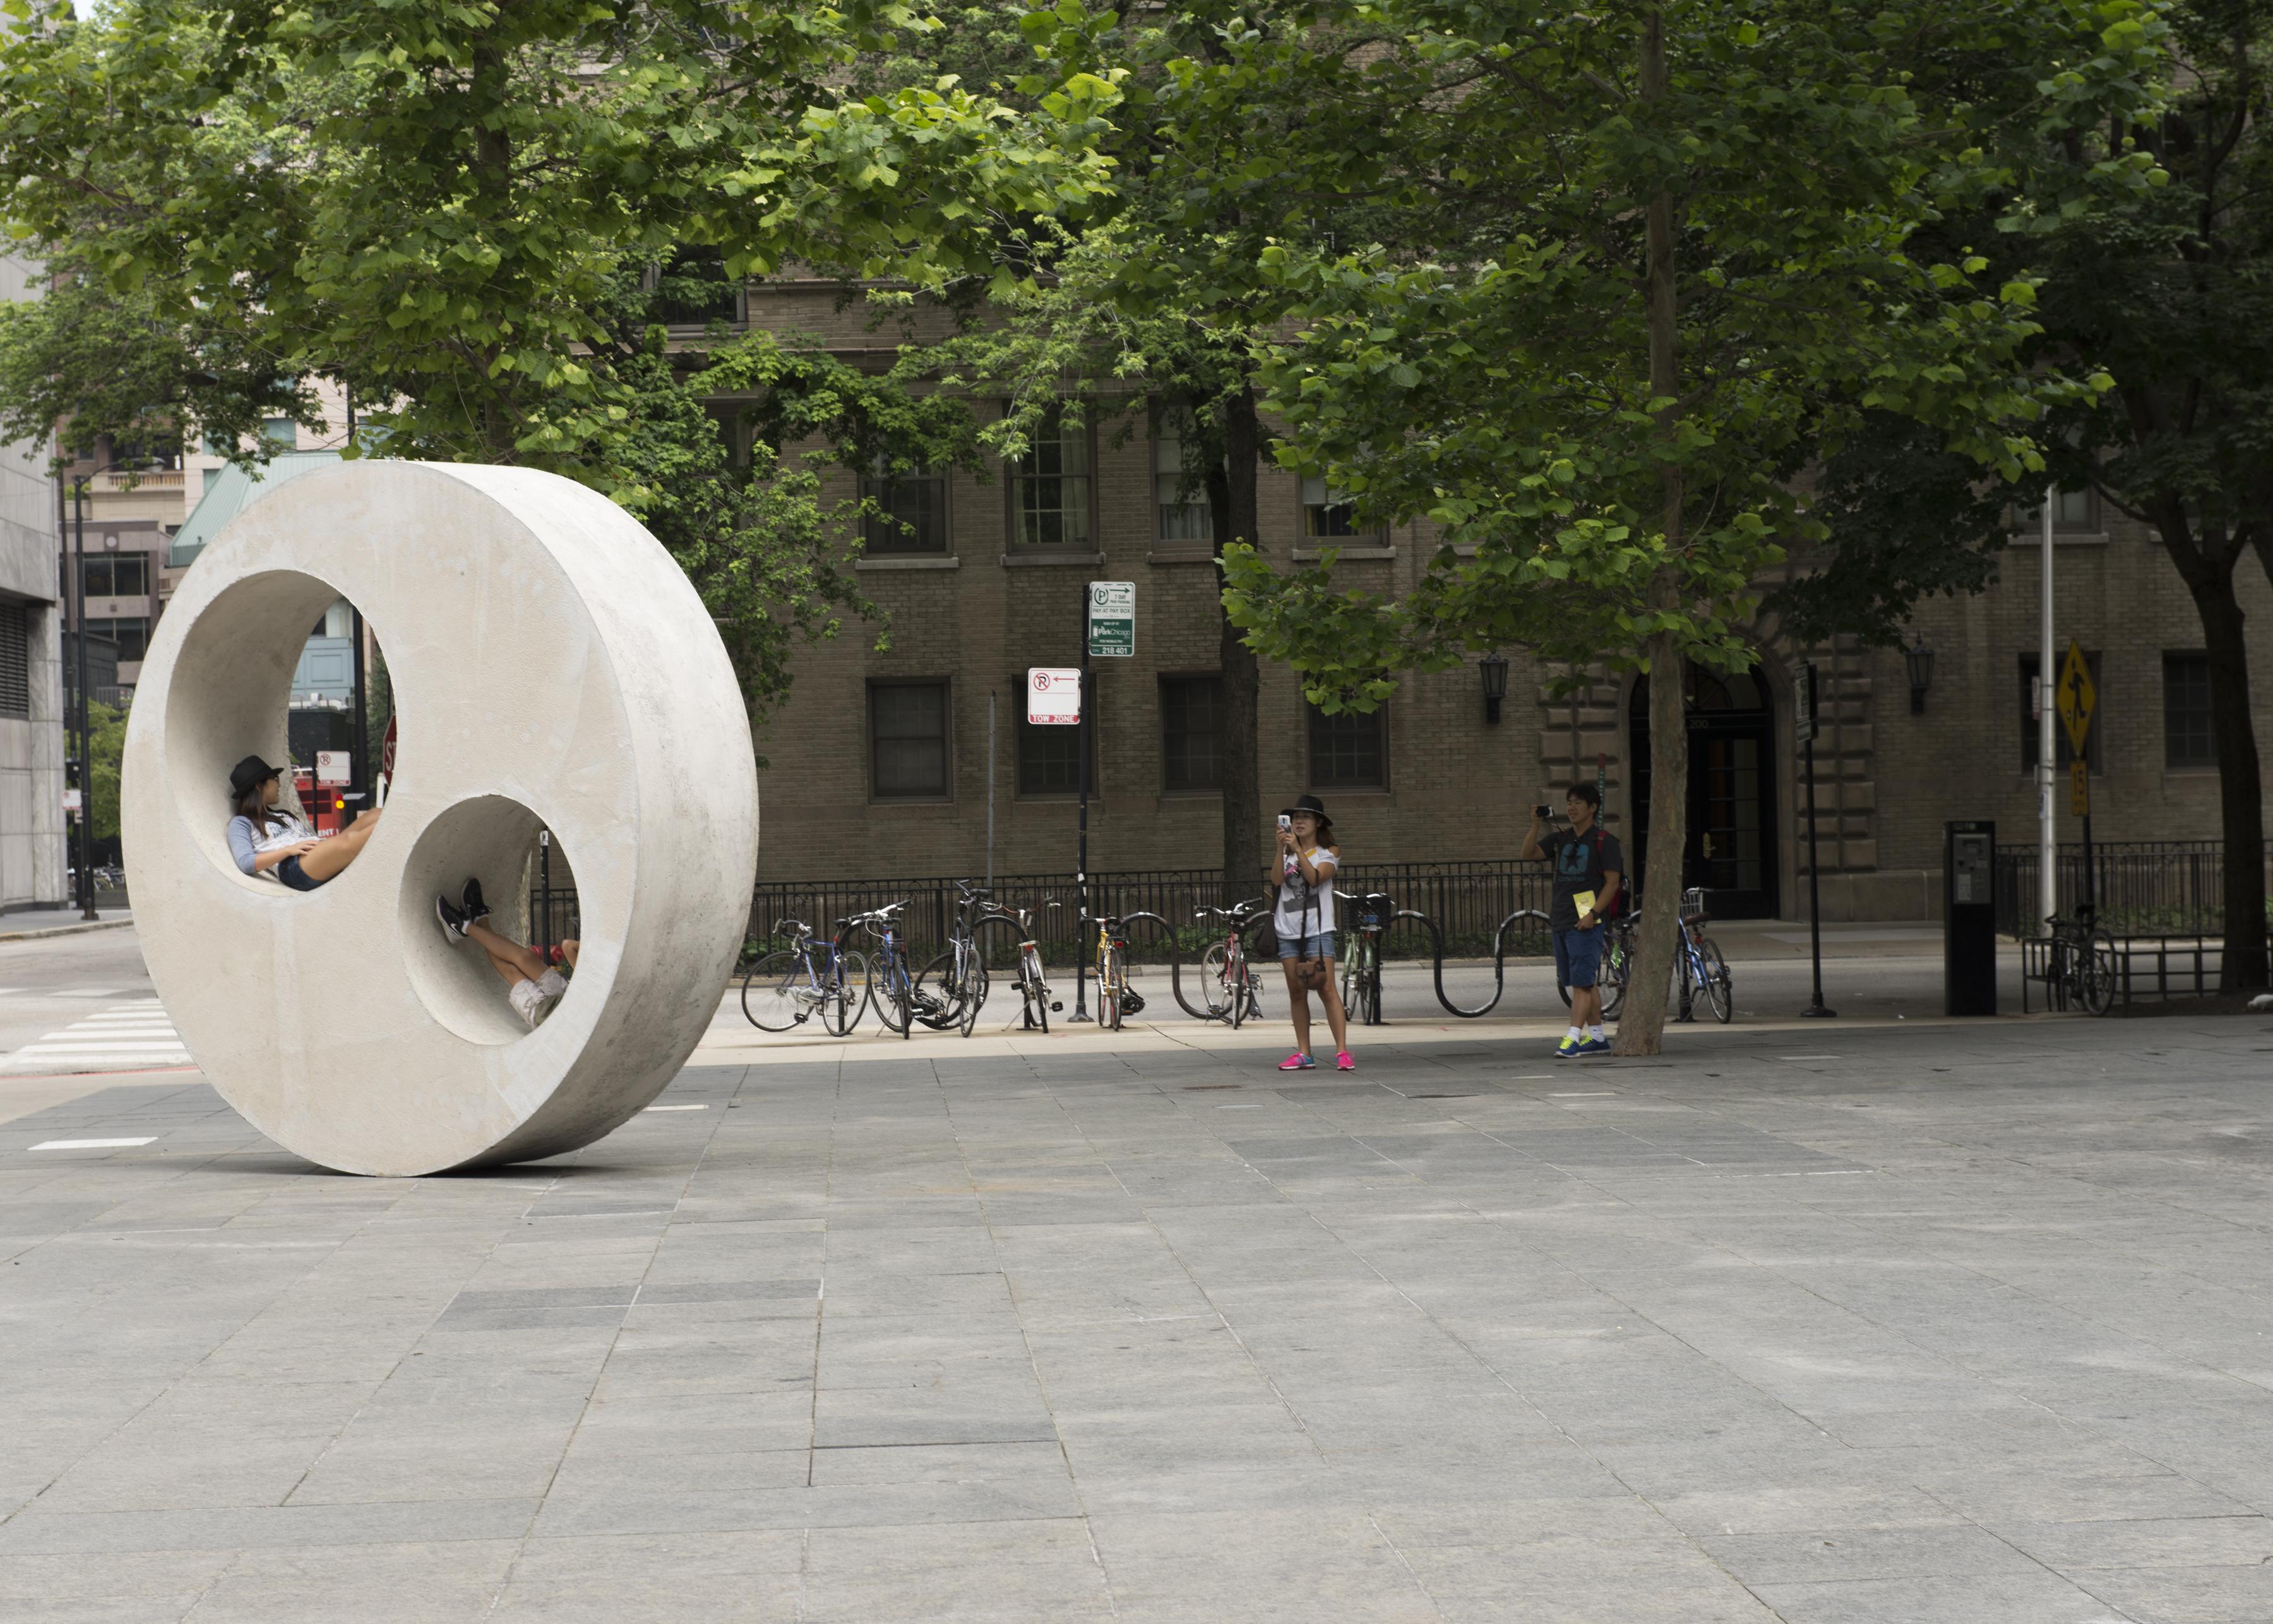 Teens lounging in two circle cutouts of a large circular concrete sculpture on the MCA Plaza